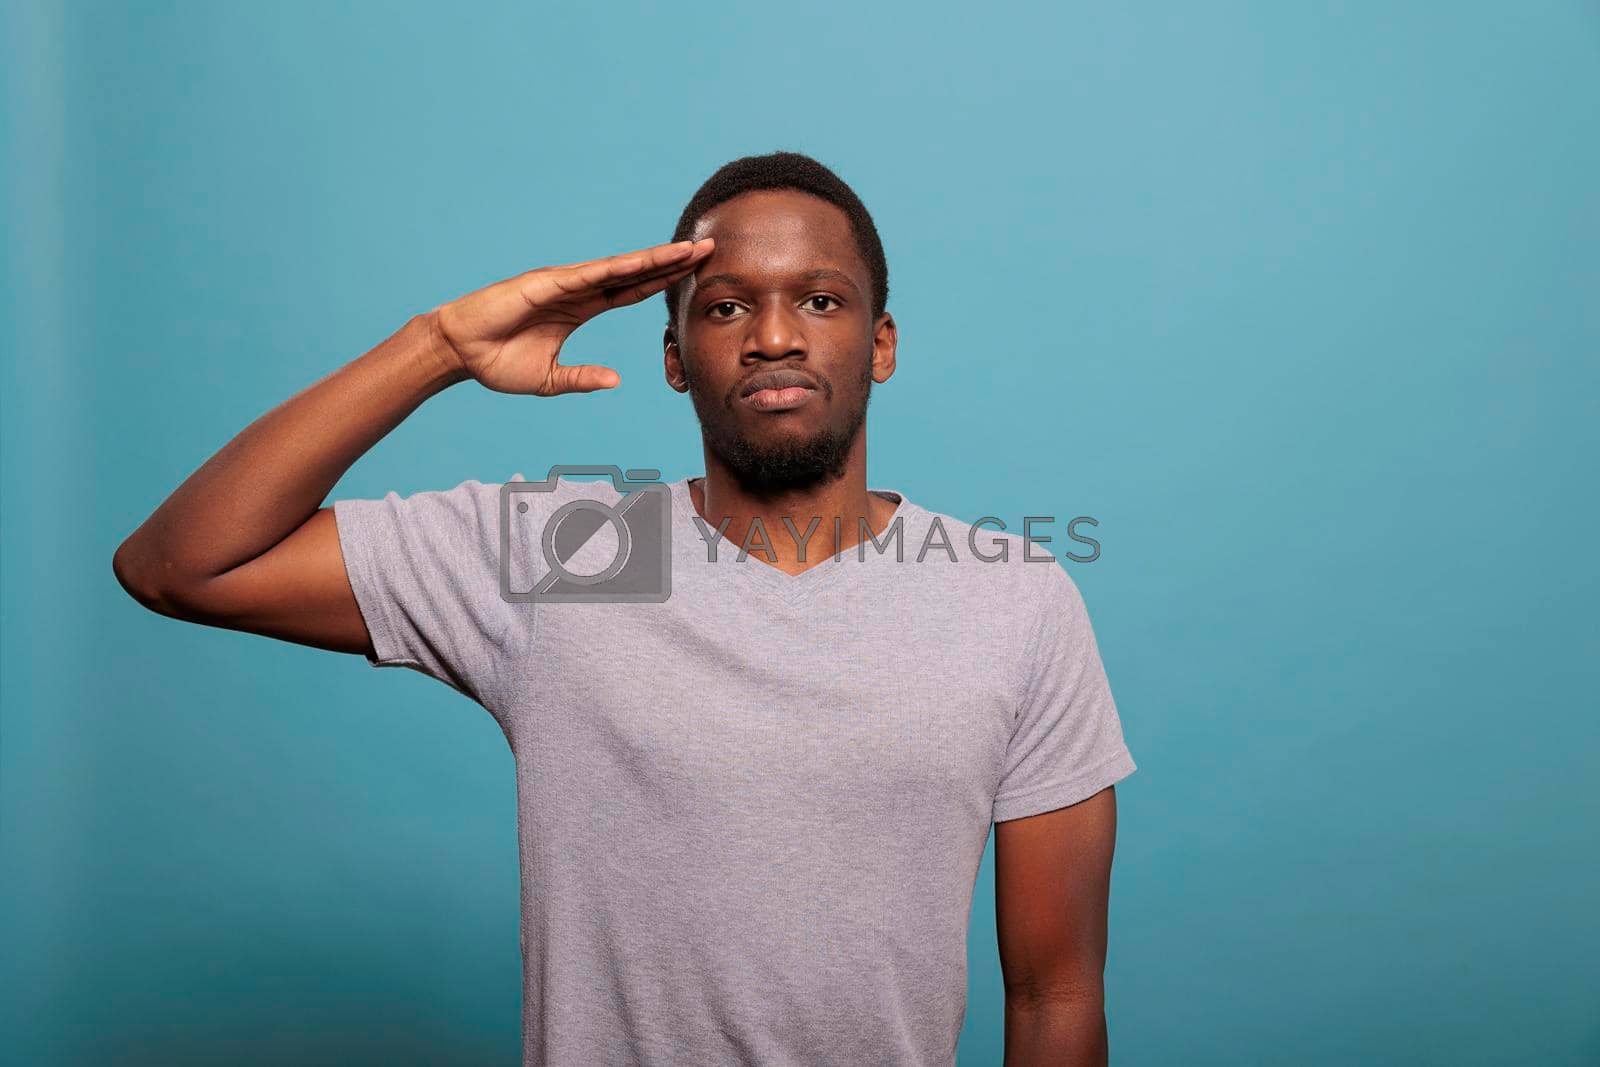 Royalty free image of Young man doing military salute with hand over forehead by DCStudio